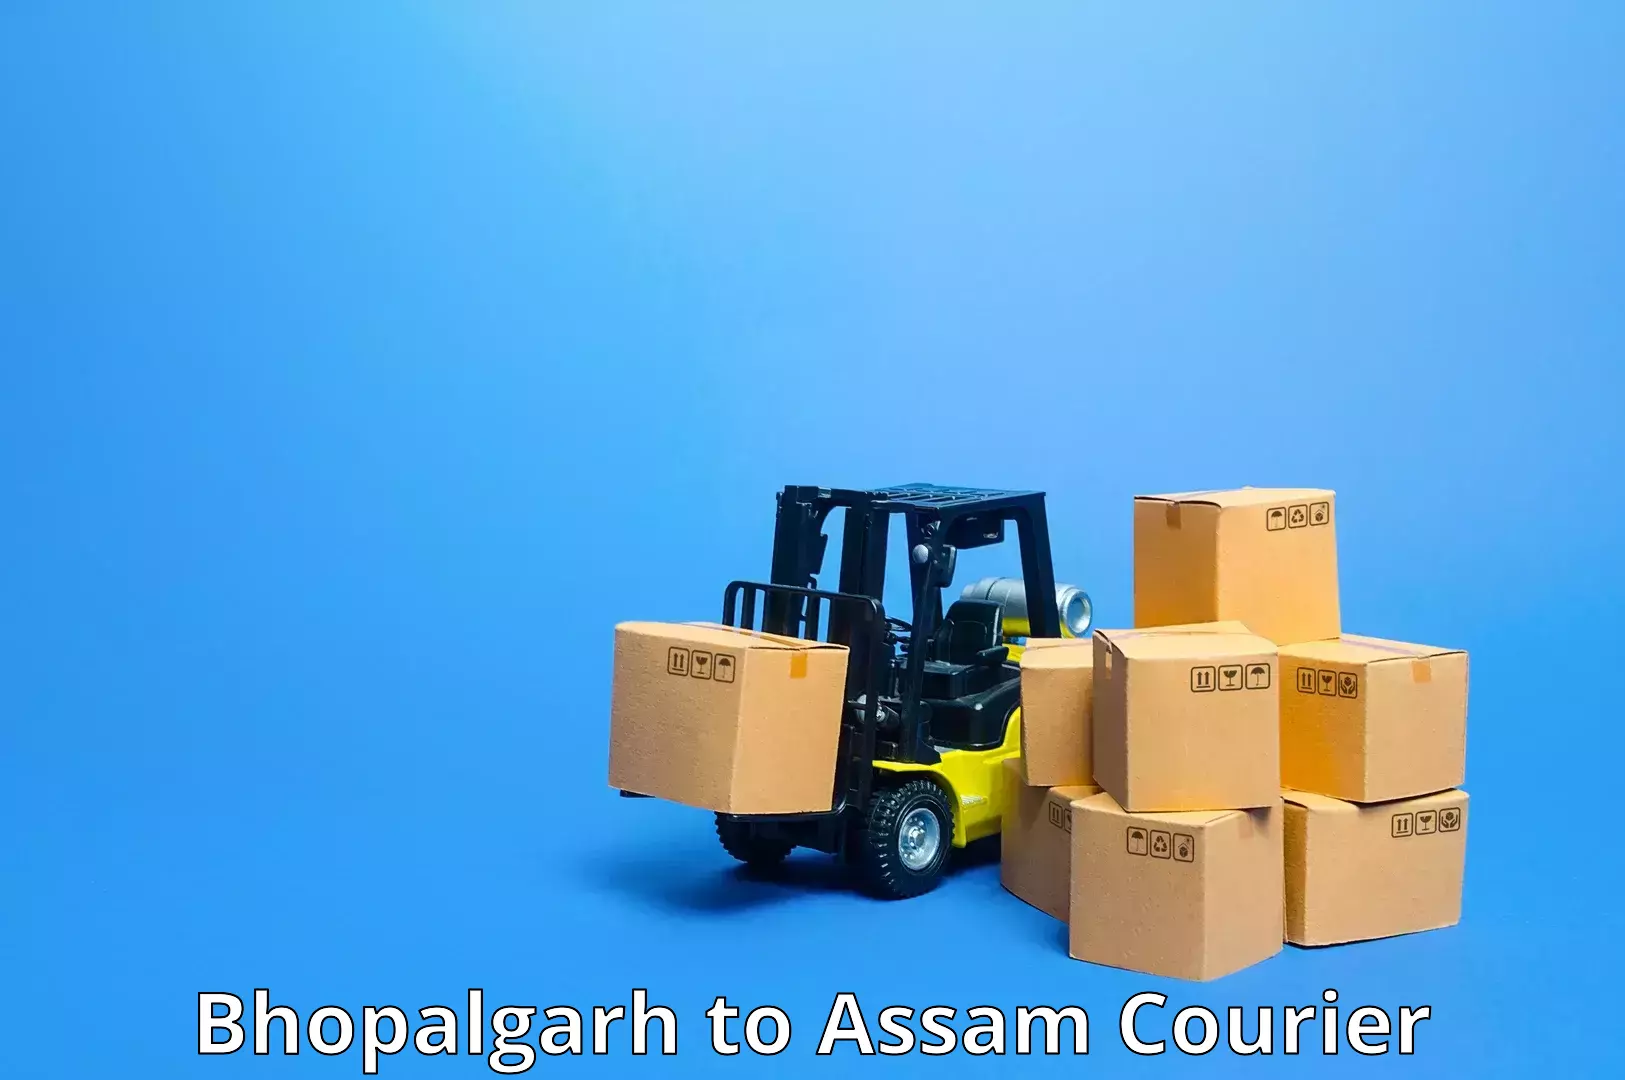 Nationwide delivery network Bhopalgarh to Assam